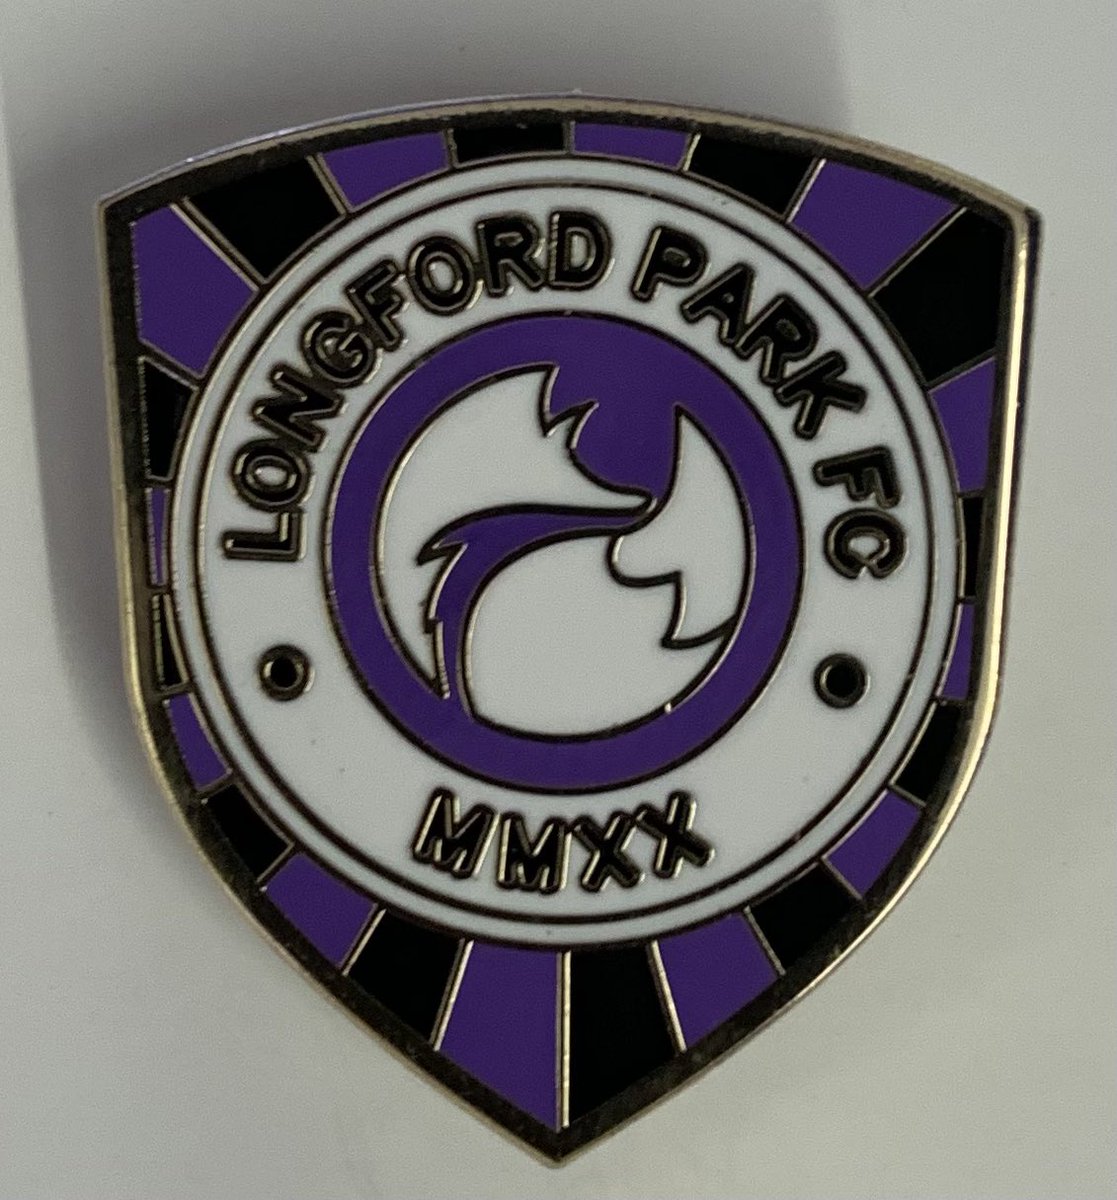 First badge for Longford Park FC